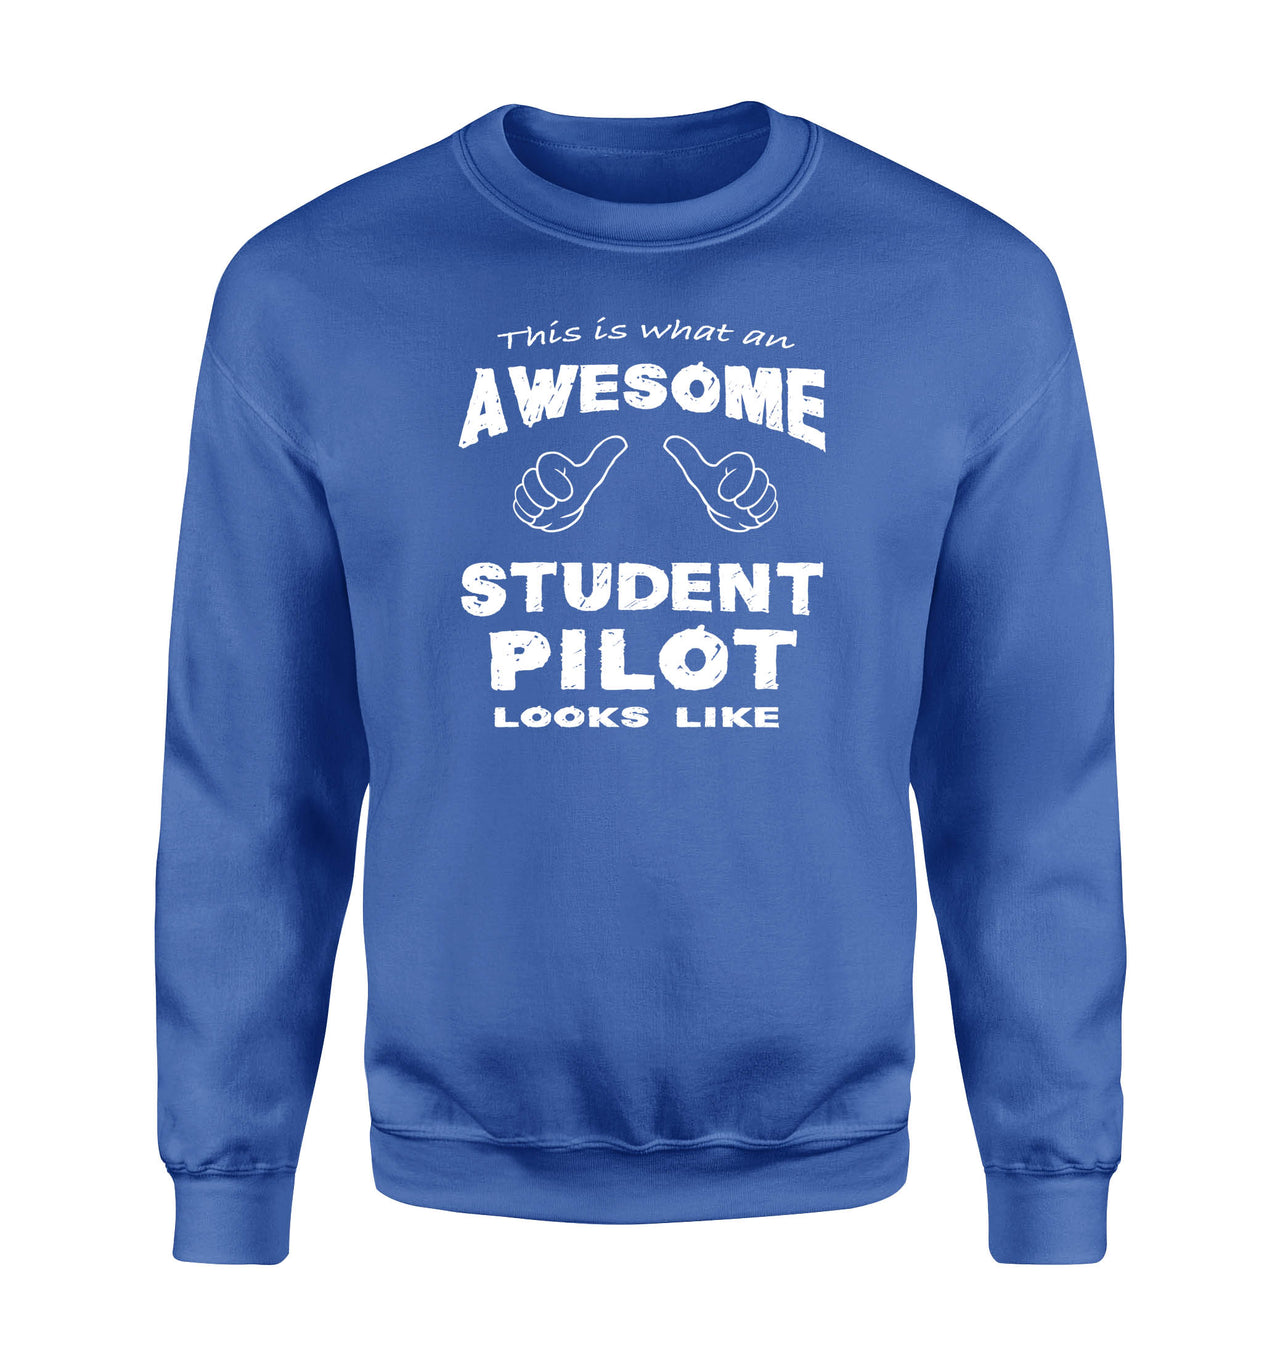 This is What an Awesome Student Pilot Looks Like Sweatshirts